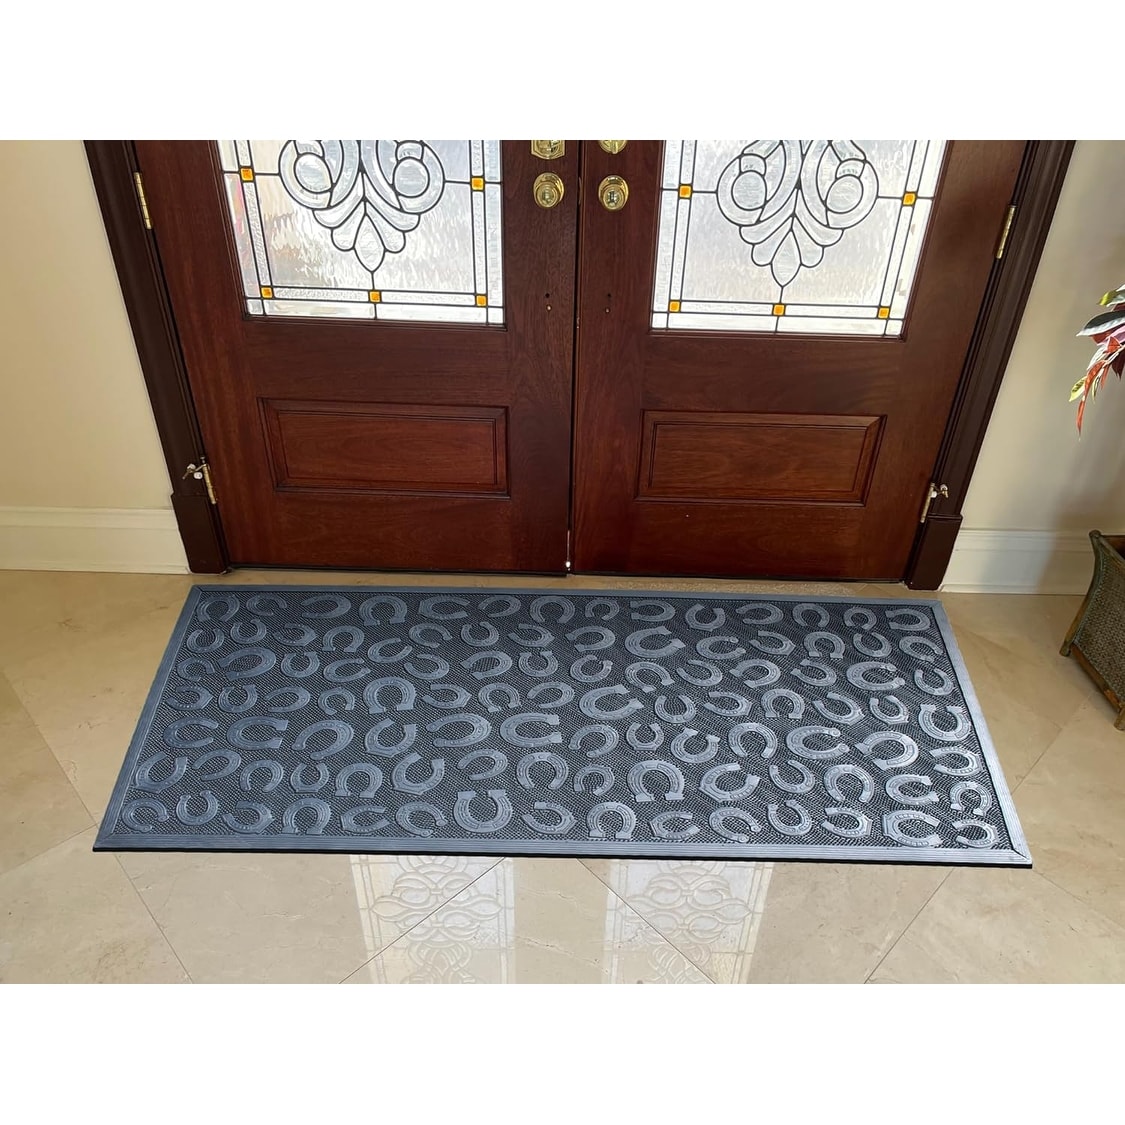 A1 Home Collections A1hc Copper 18 in. x 30 in. Rubber Pin Non-Slip Backing Indoor/Outdoor Entrance Durable Door Mat, Copper Dogs Playing